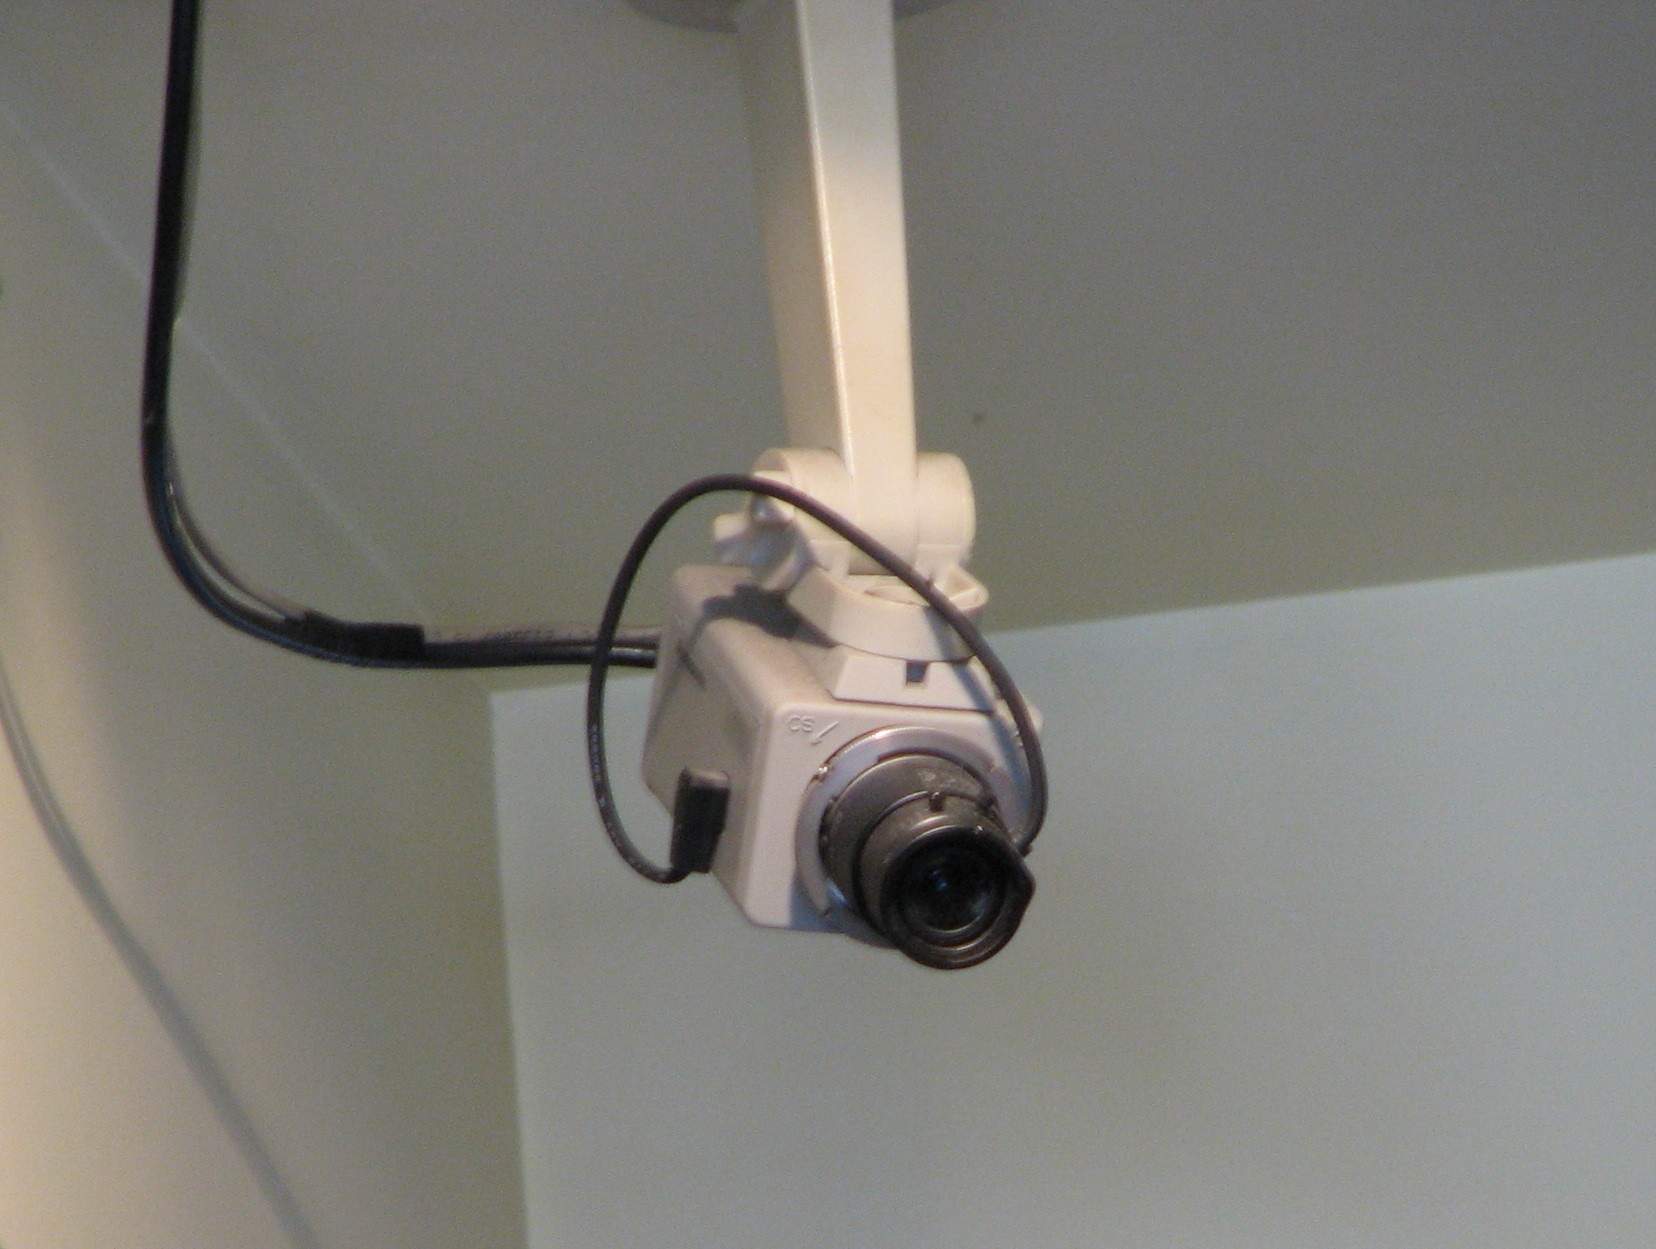 Louisville KY Video Management Equipment for Security